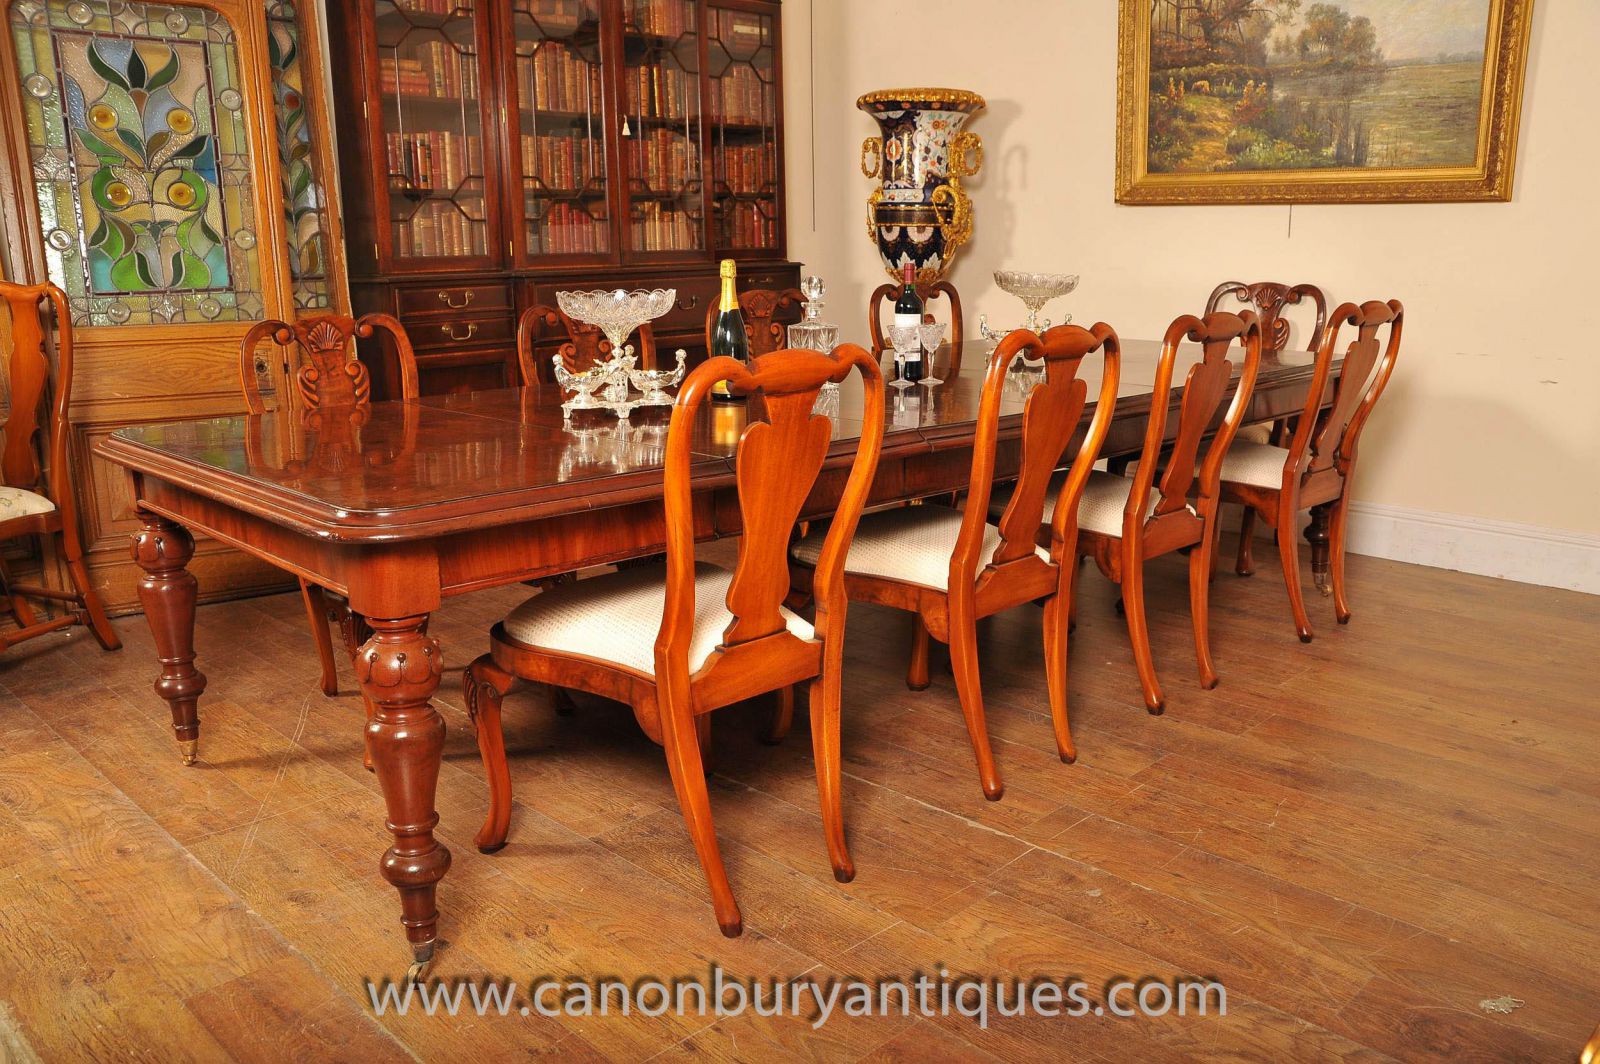 Lovely walnut Victorian dining tables and set of Queen Anne chairs to match